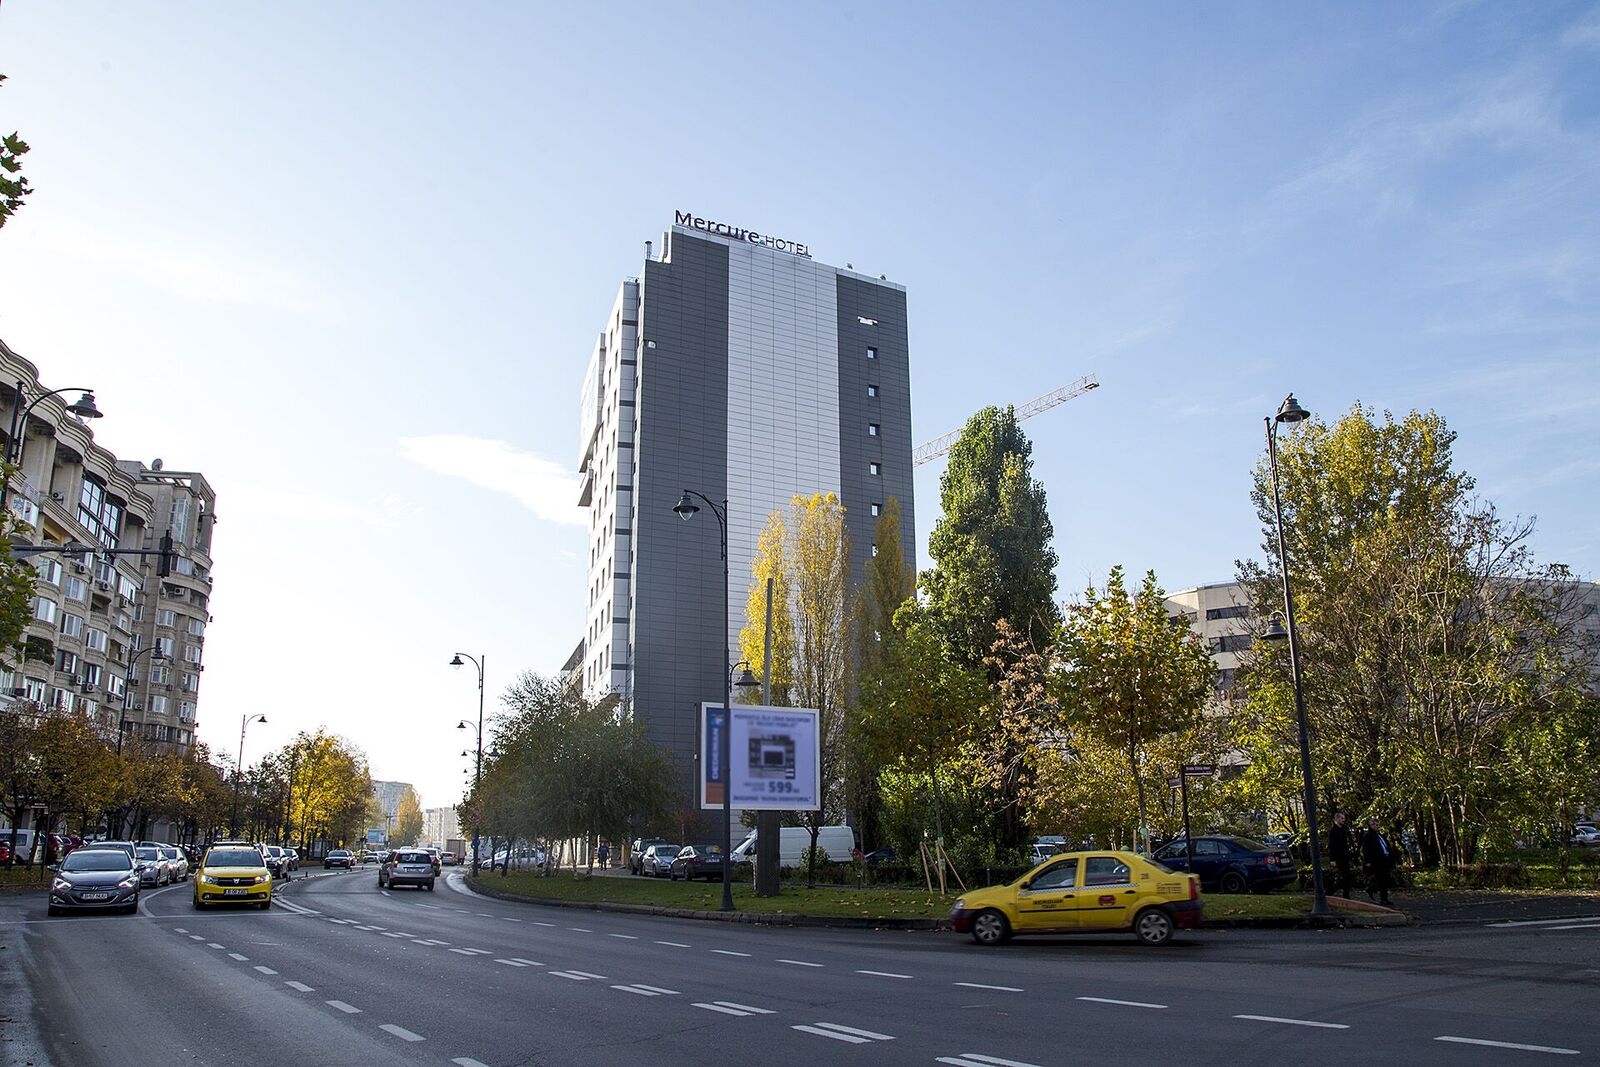 Poland-based Orbis Hotel Group the licensor of AccorHotels brand in Poland and Eastern Europe has acquired the Mercure Buch